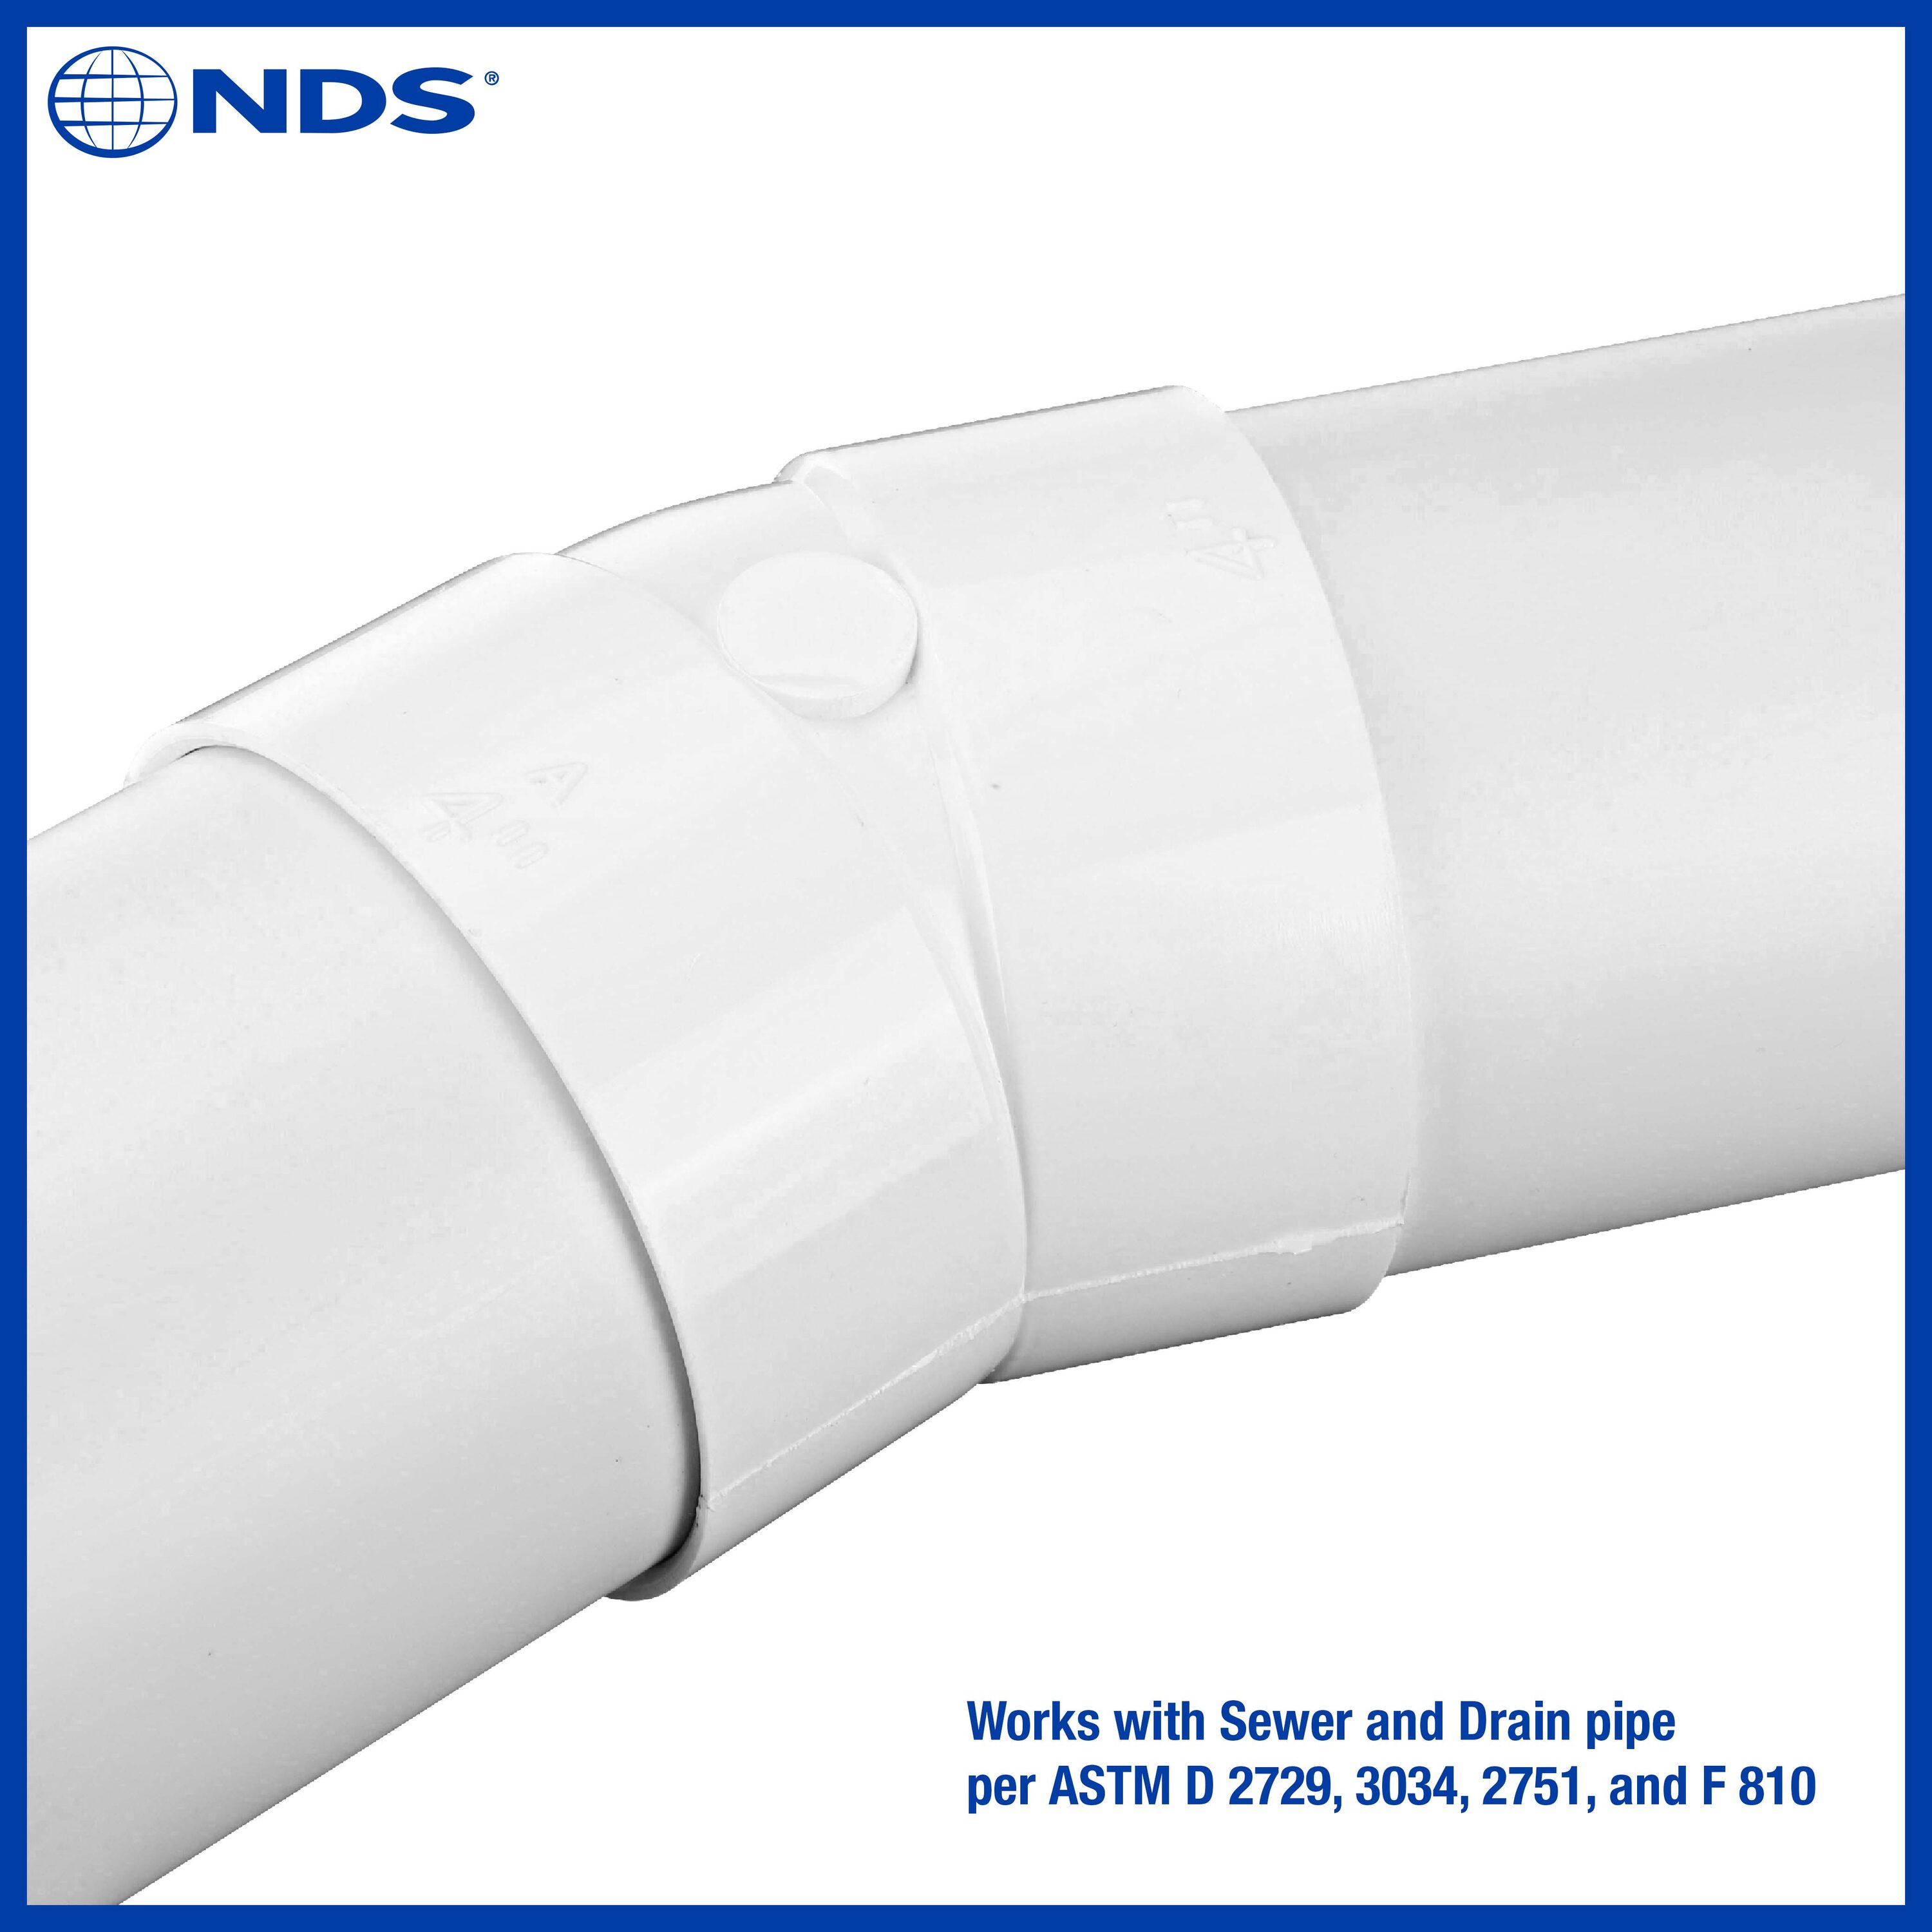 PVC 4 inches x 10 ft SOLID SEWER PIPE - Ecolotube NS Spec.